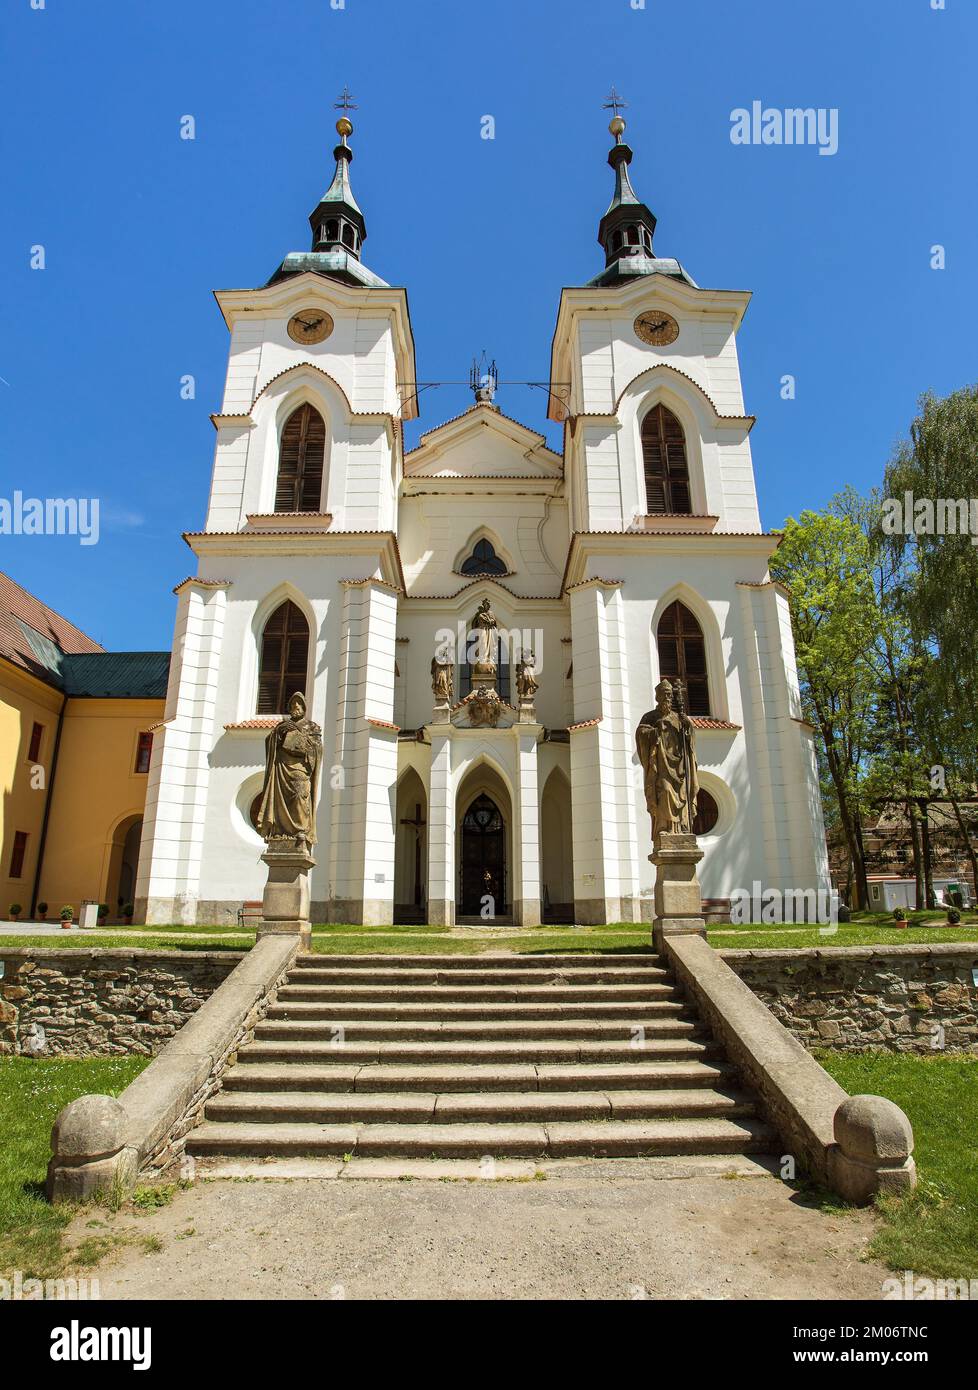 Church in the Zeliv Premonstratensian monastery, baroque architecture by Jan Blazej Santini Aichel, Pelhrimov District in the Vysocina Region of the C Stock Photo